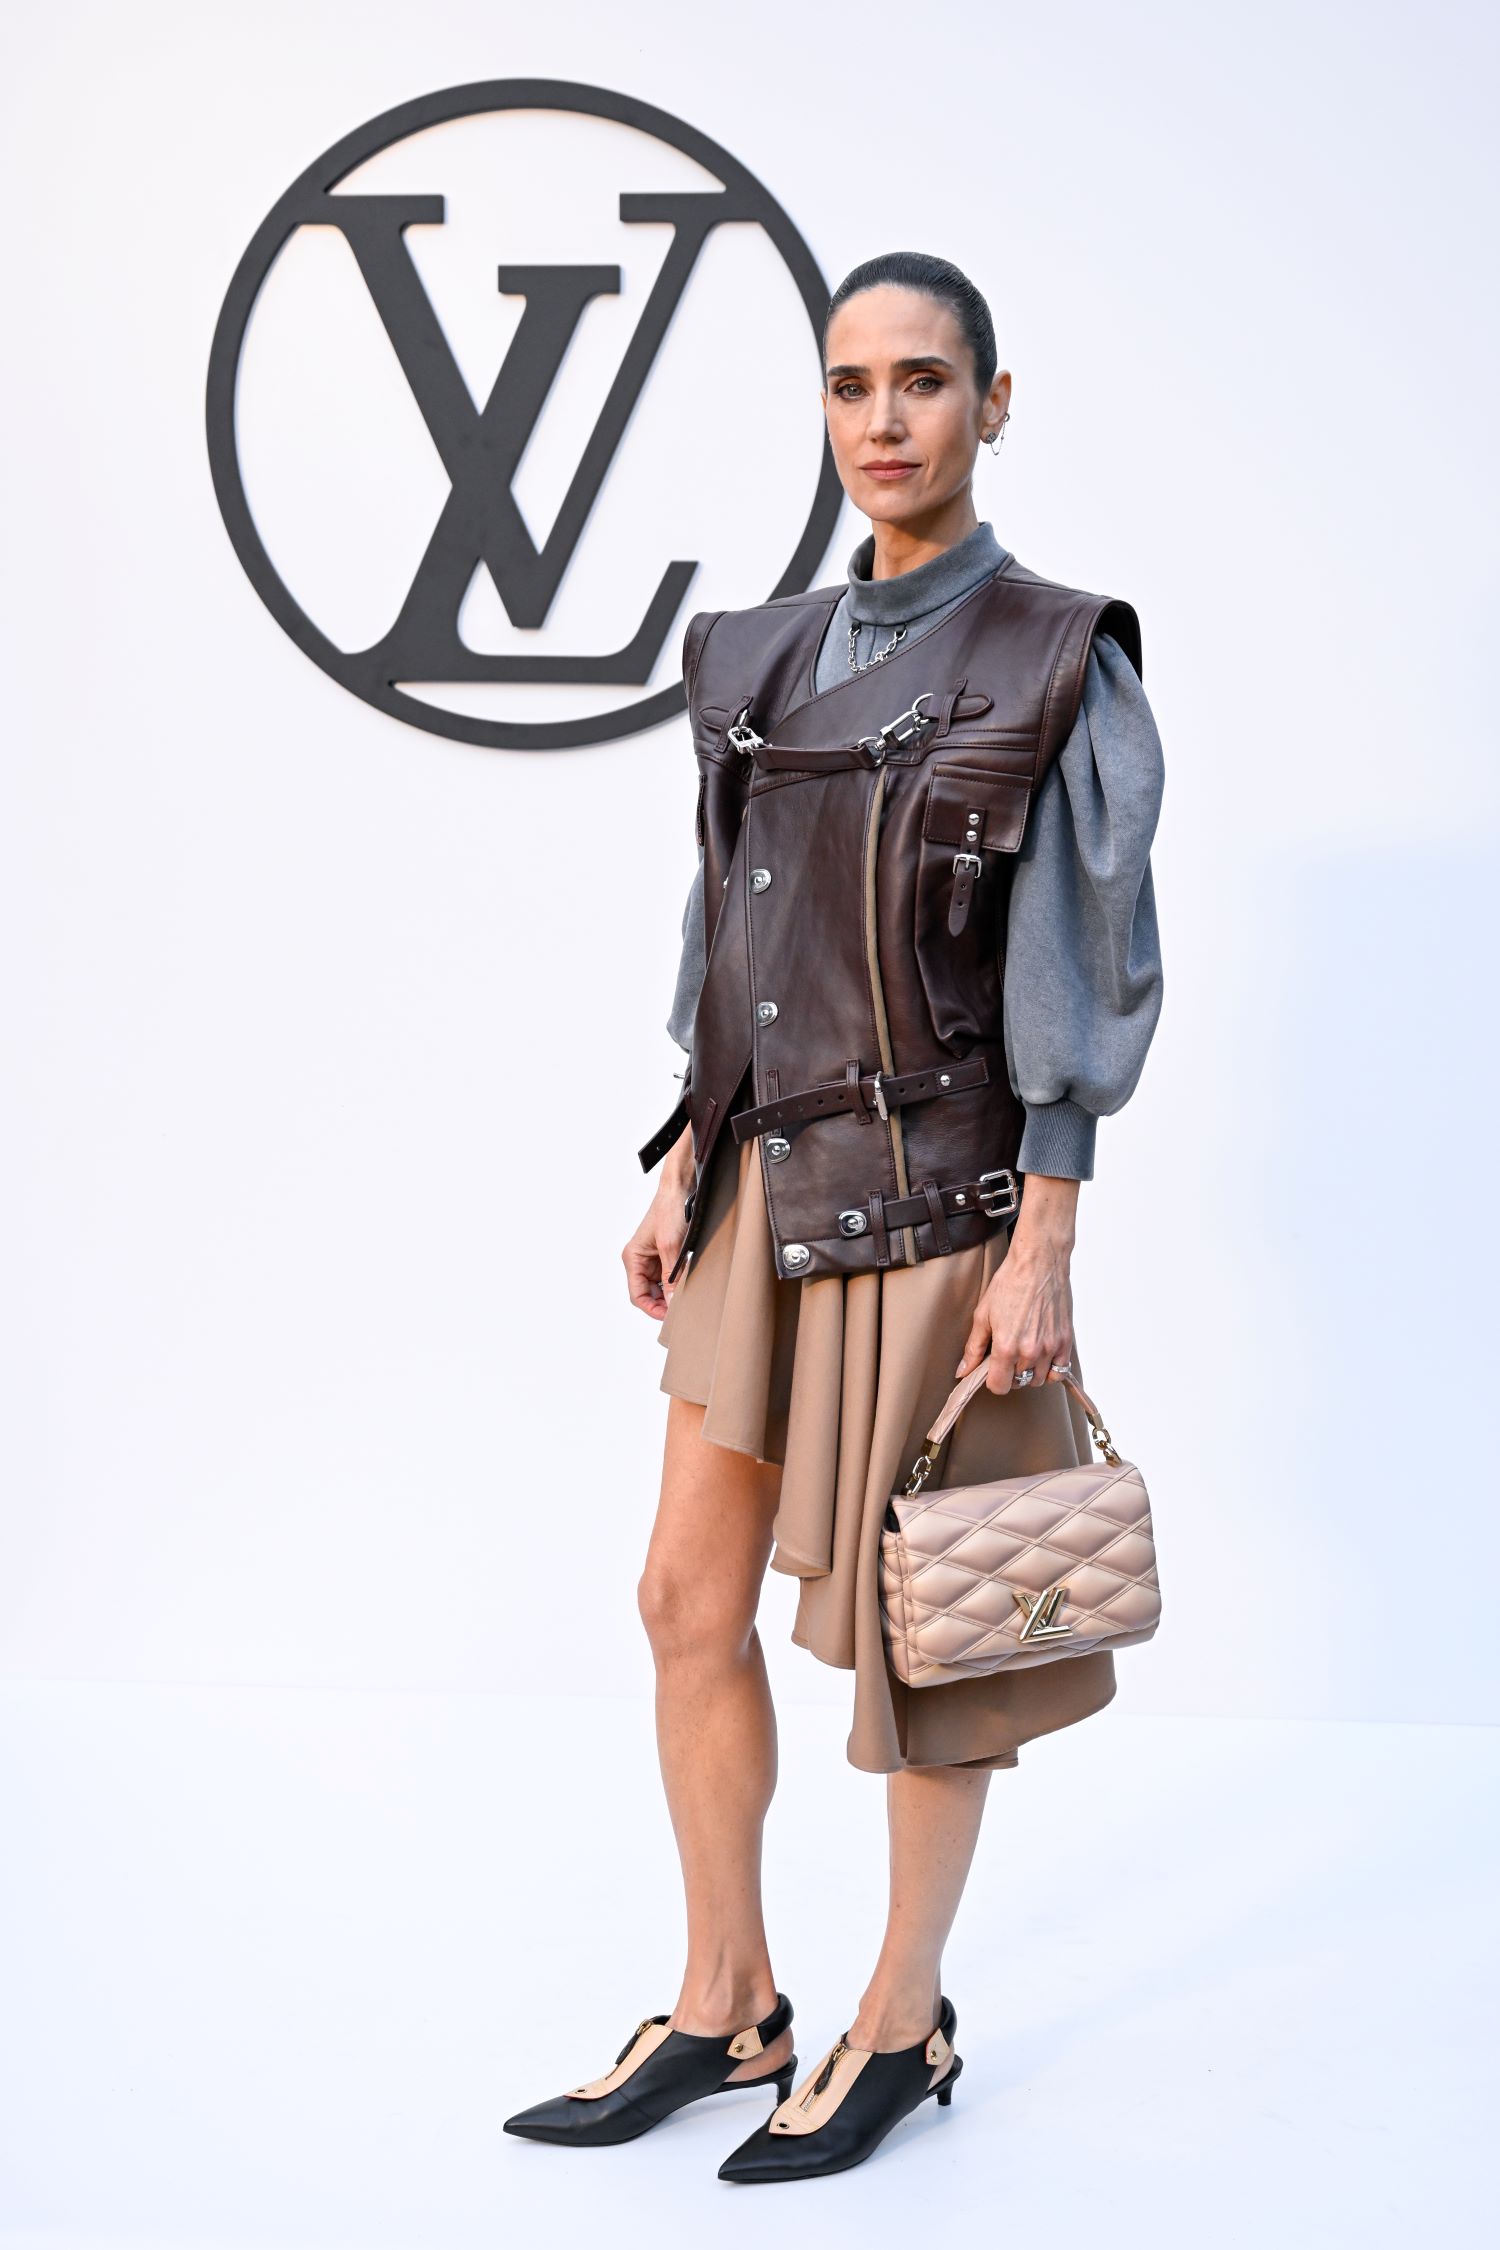 Jennifer Connelly attending the Cruise 2025 Fashion Show by Louis Vuitton in Barcelona | CRUISE 2025 FASHION SHOW COLLECTION © Louis Vuitton – All rights reserved